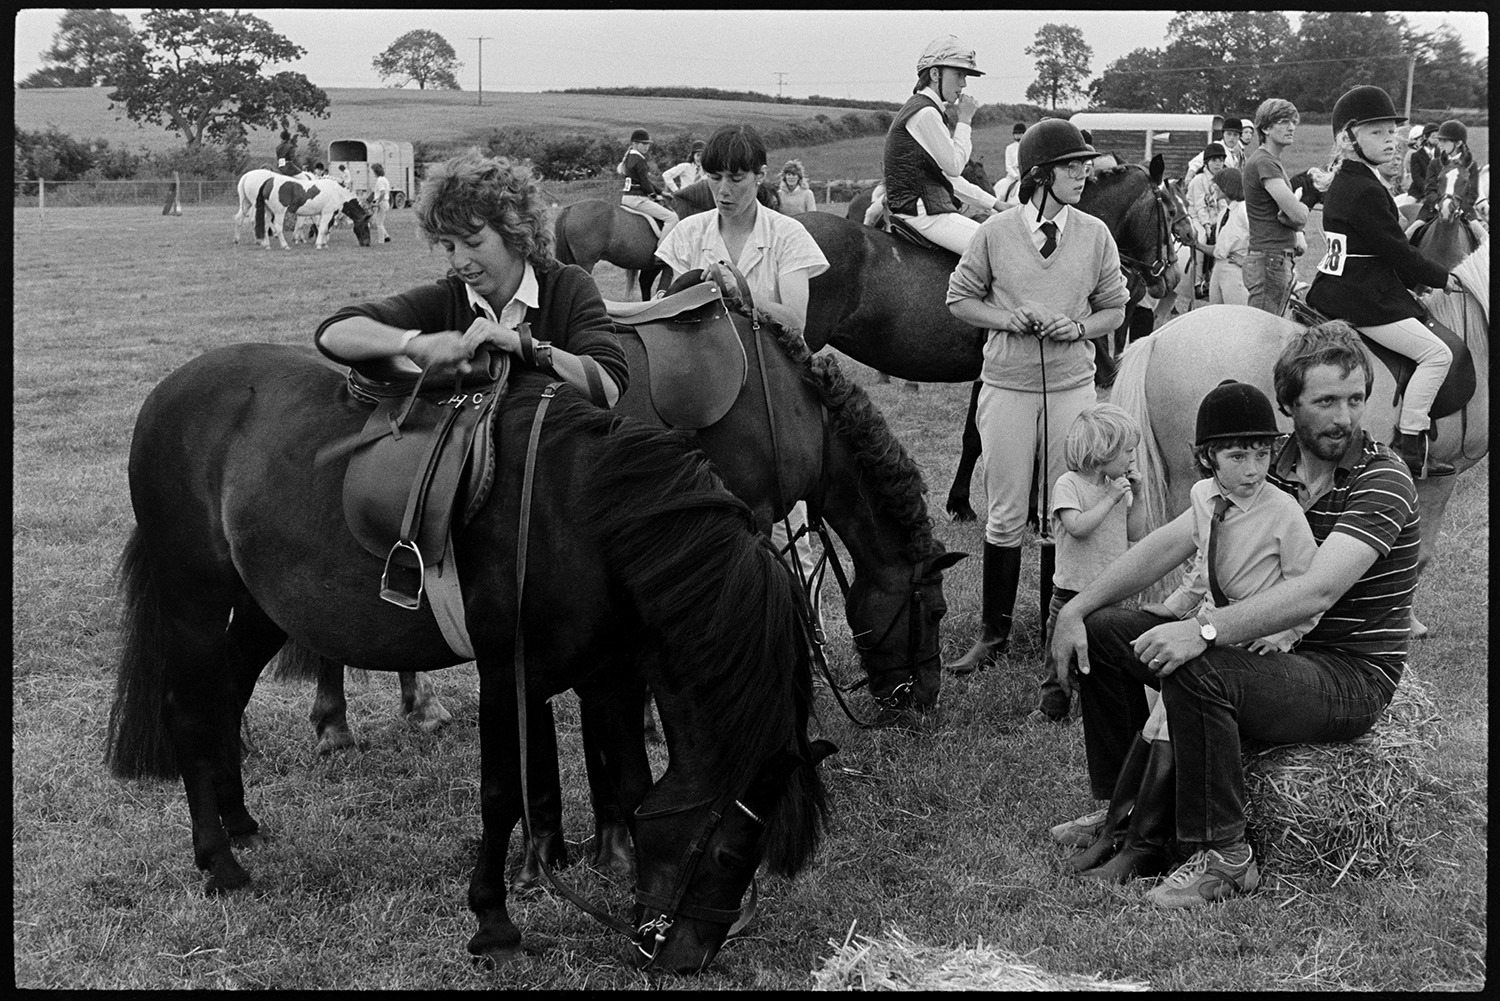 Gymkhana at Fair, horses, ponies and riders. Old bus. 
[Two women sorting the saddles on horses at a gymkhana at Winkleigh Fair. Riders, horses and spectators are gathered in the field in the background.]